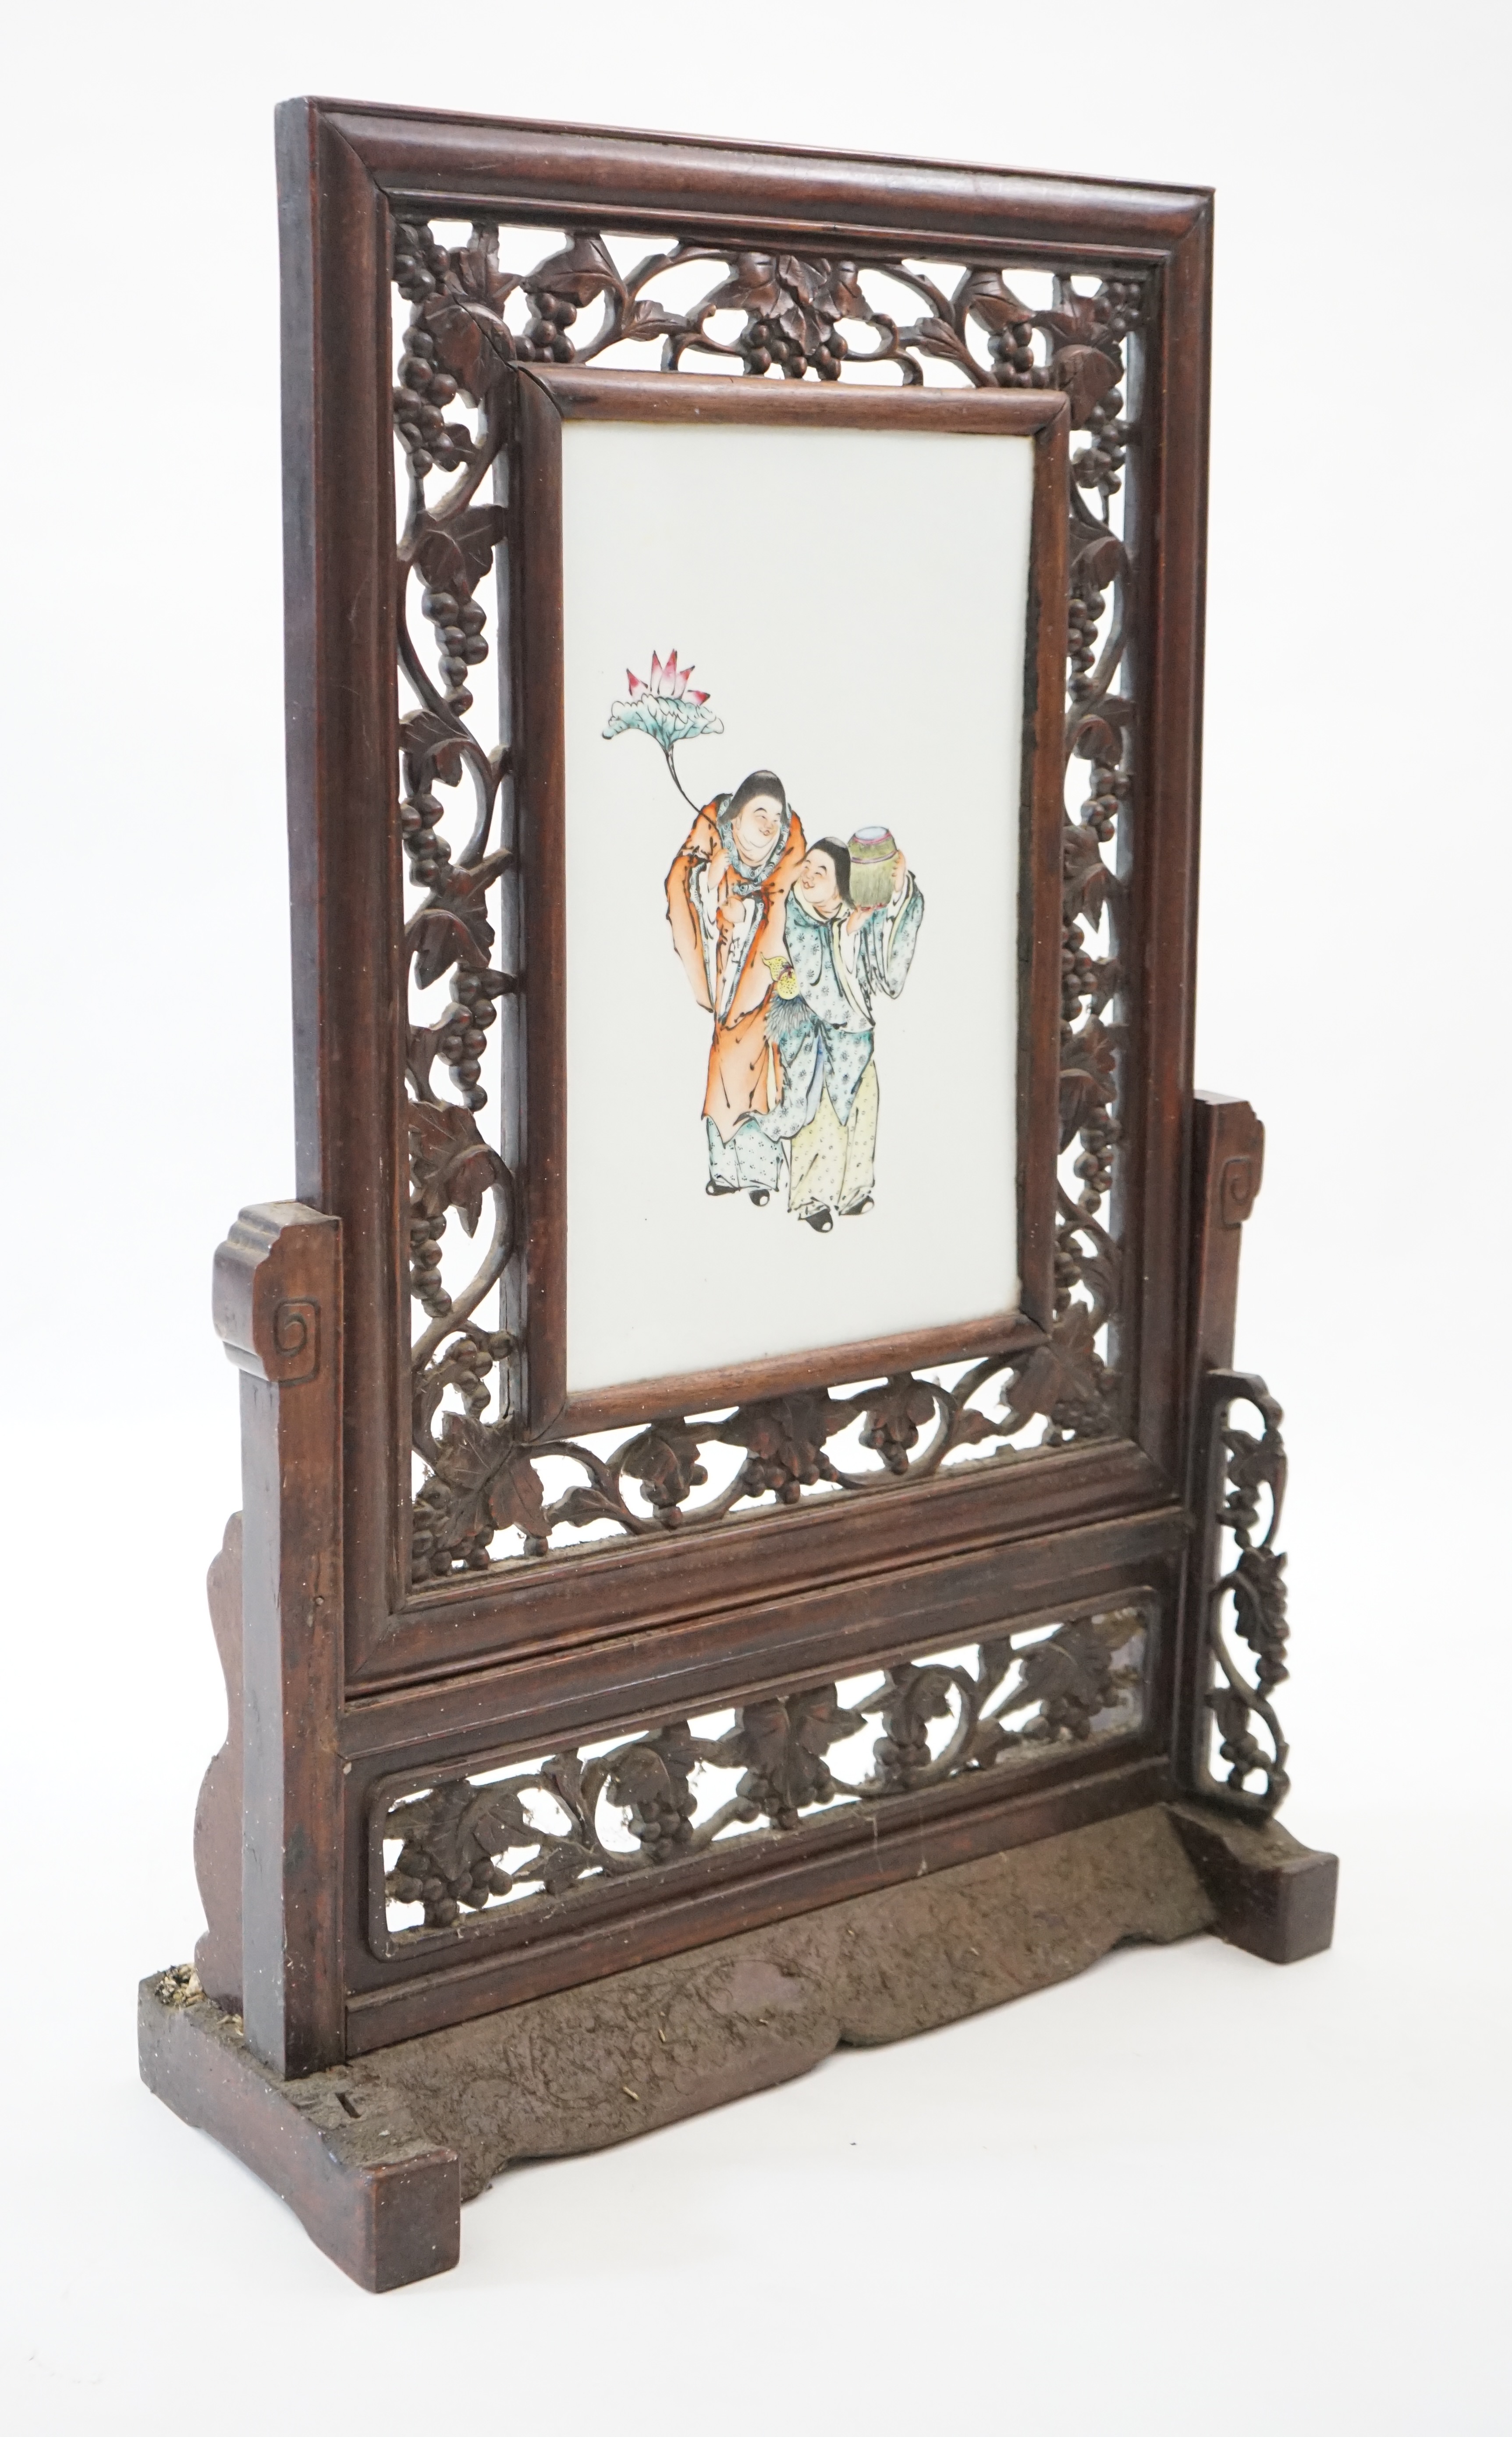 A Chinese enamelled porcelain and hardwood table screen, Republic period, painted with the HeHe Erxian, holding a sprig of lotus and a box and cover, the plaque 37.5cm x 24cm, the wood stand and frame carved with vines,